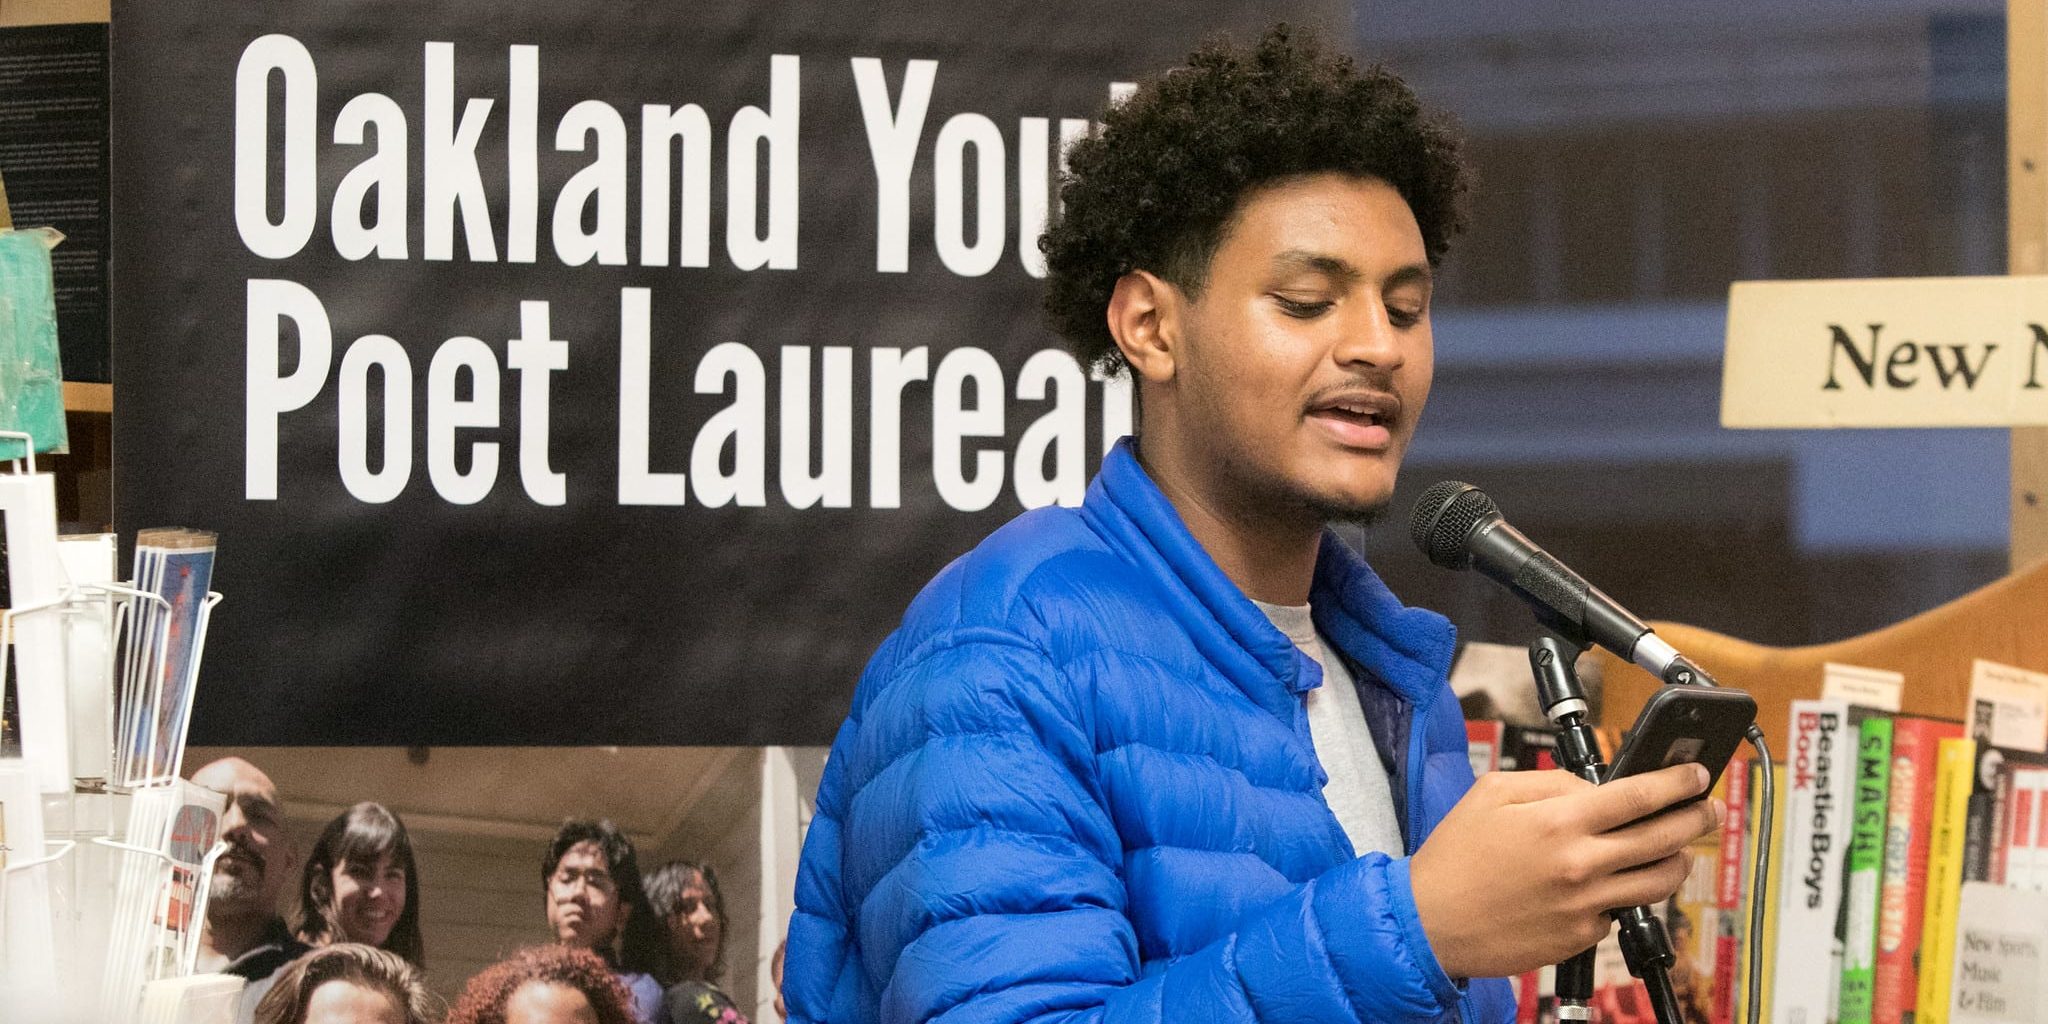 young person is reading a poem from their cellphone into a microphone for a performance in a book store